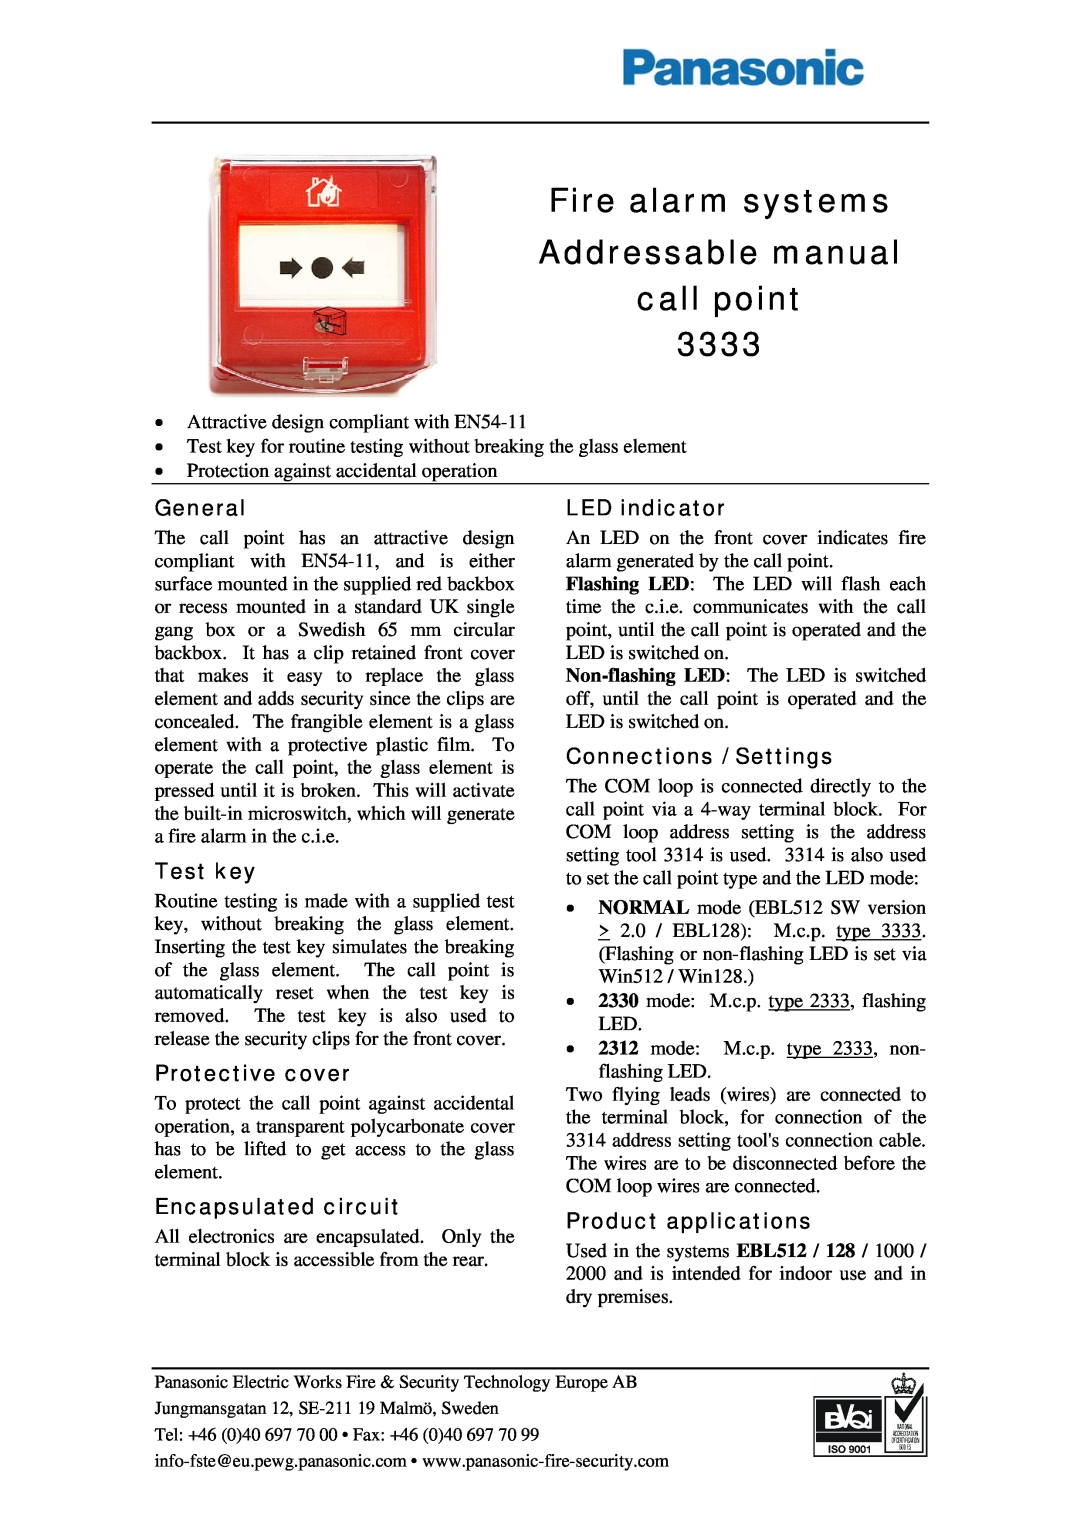 Panasonic 3333 manual Fire alarm systems Addressable manual call point, General, Test key, Protective cover, LED indicator 